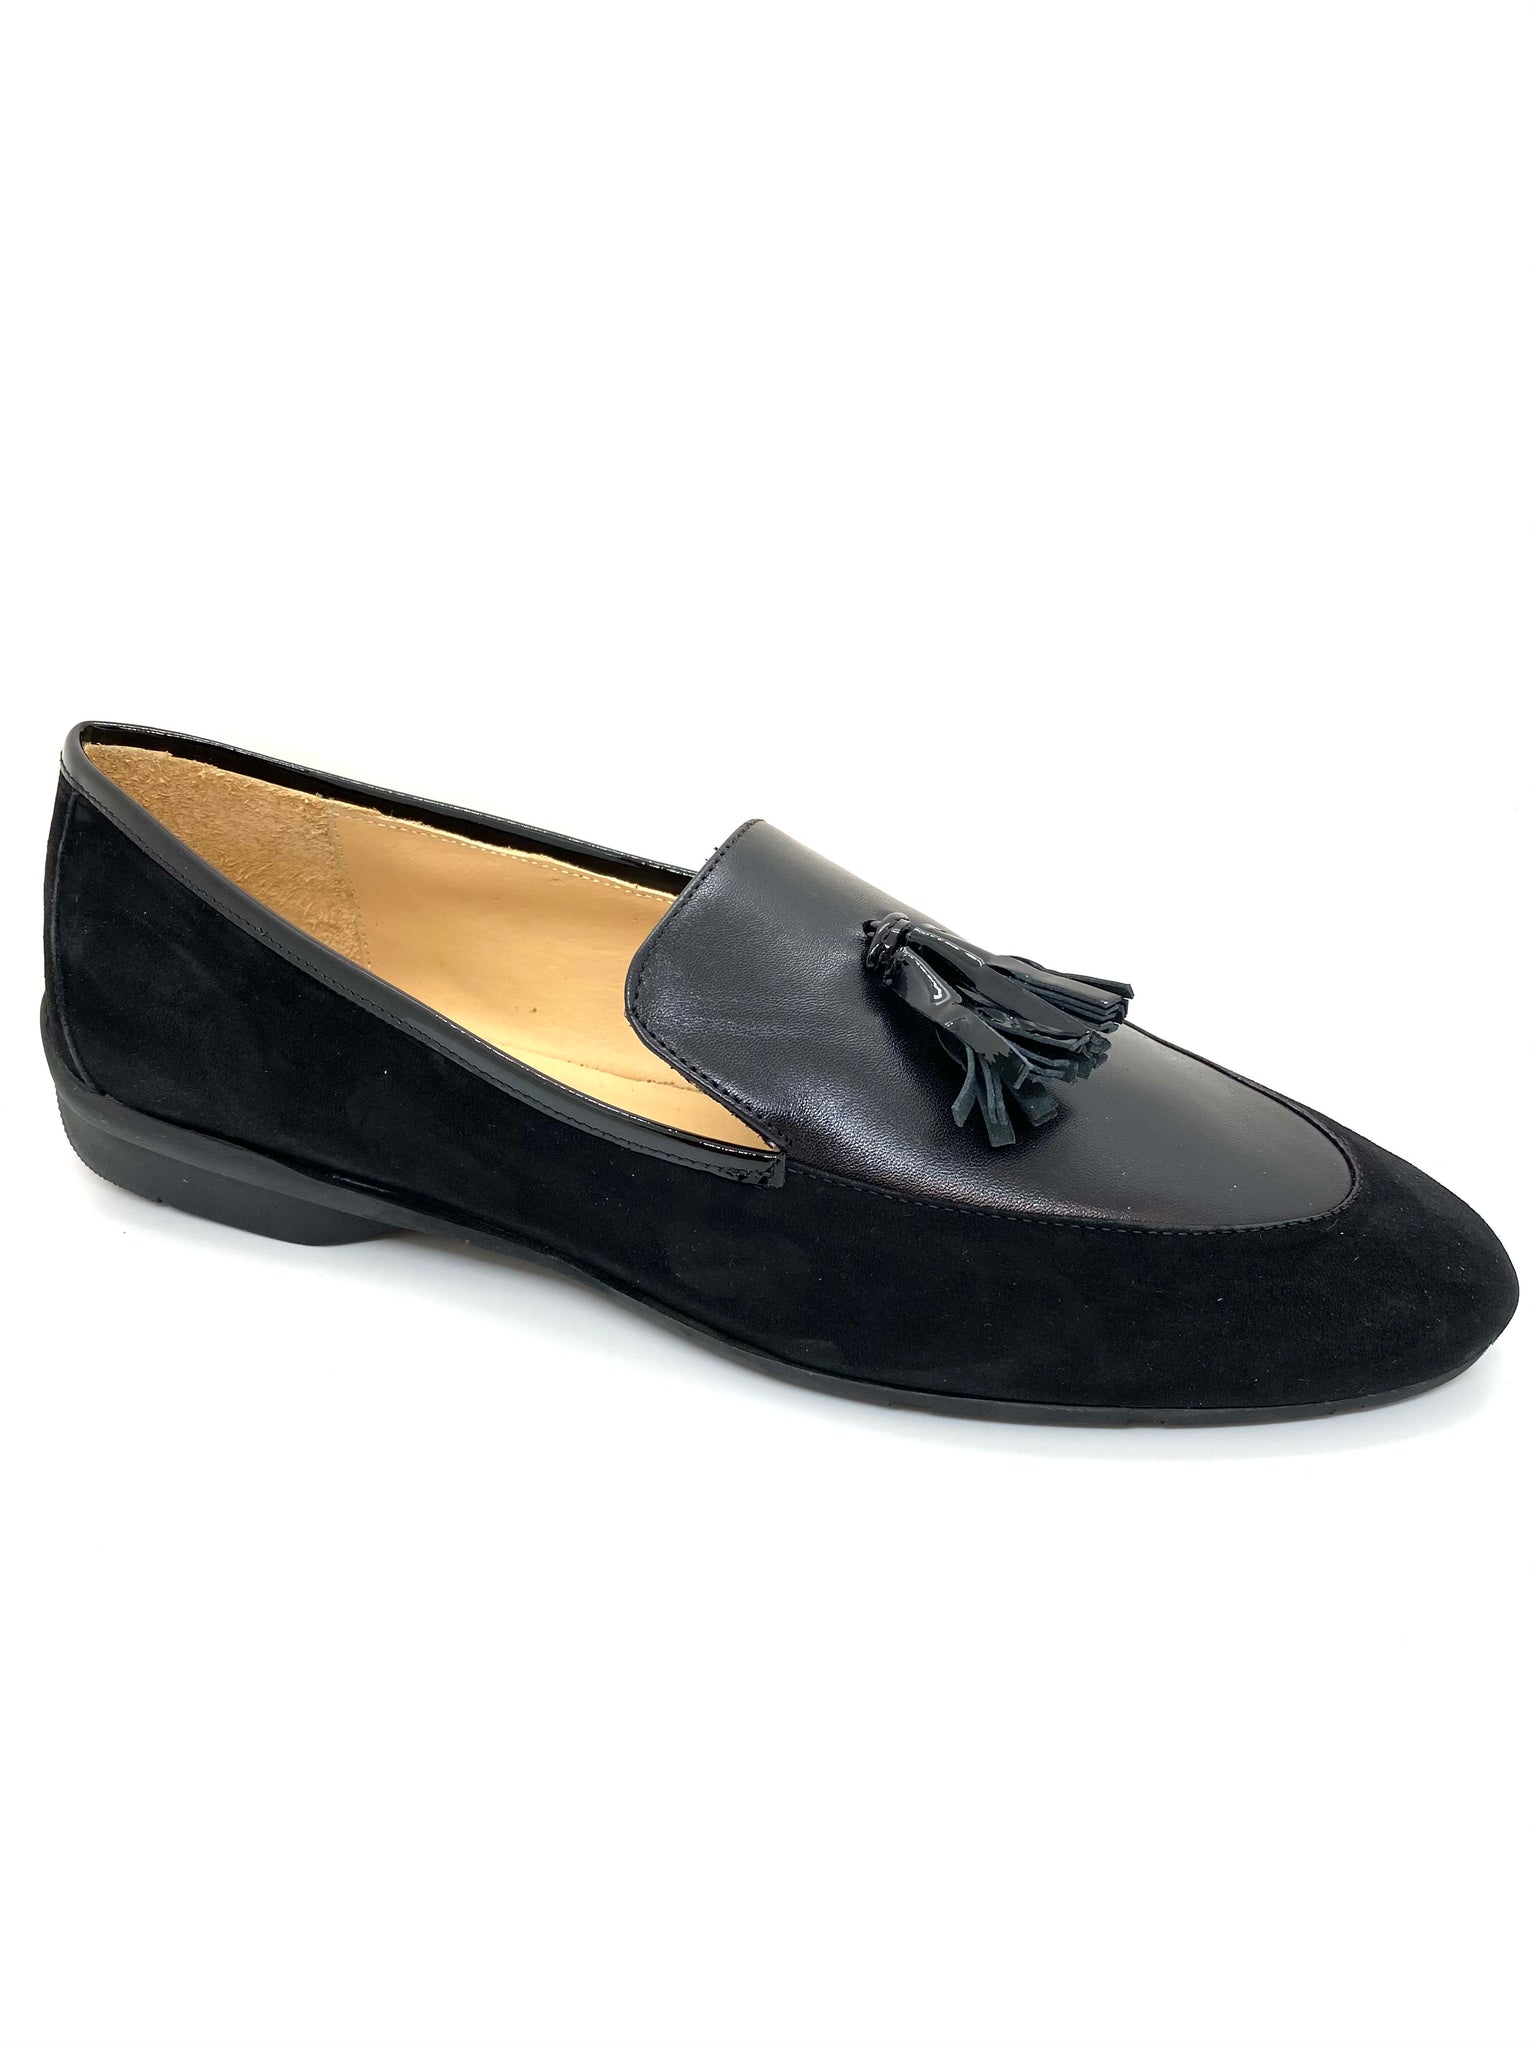 Low Heel Suede And Leather Tassel Loafer